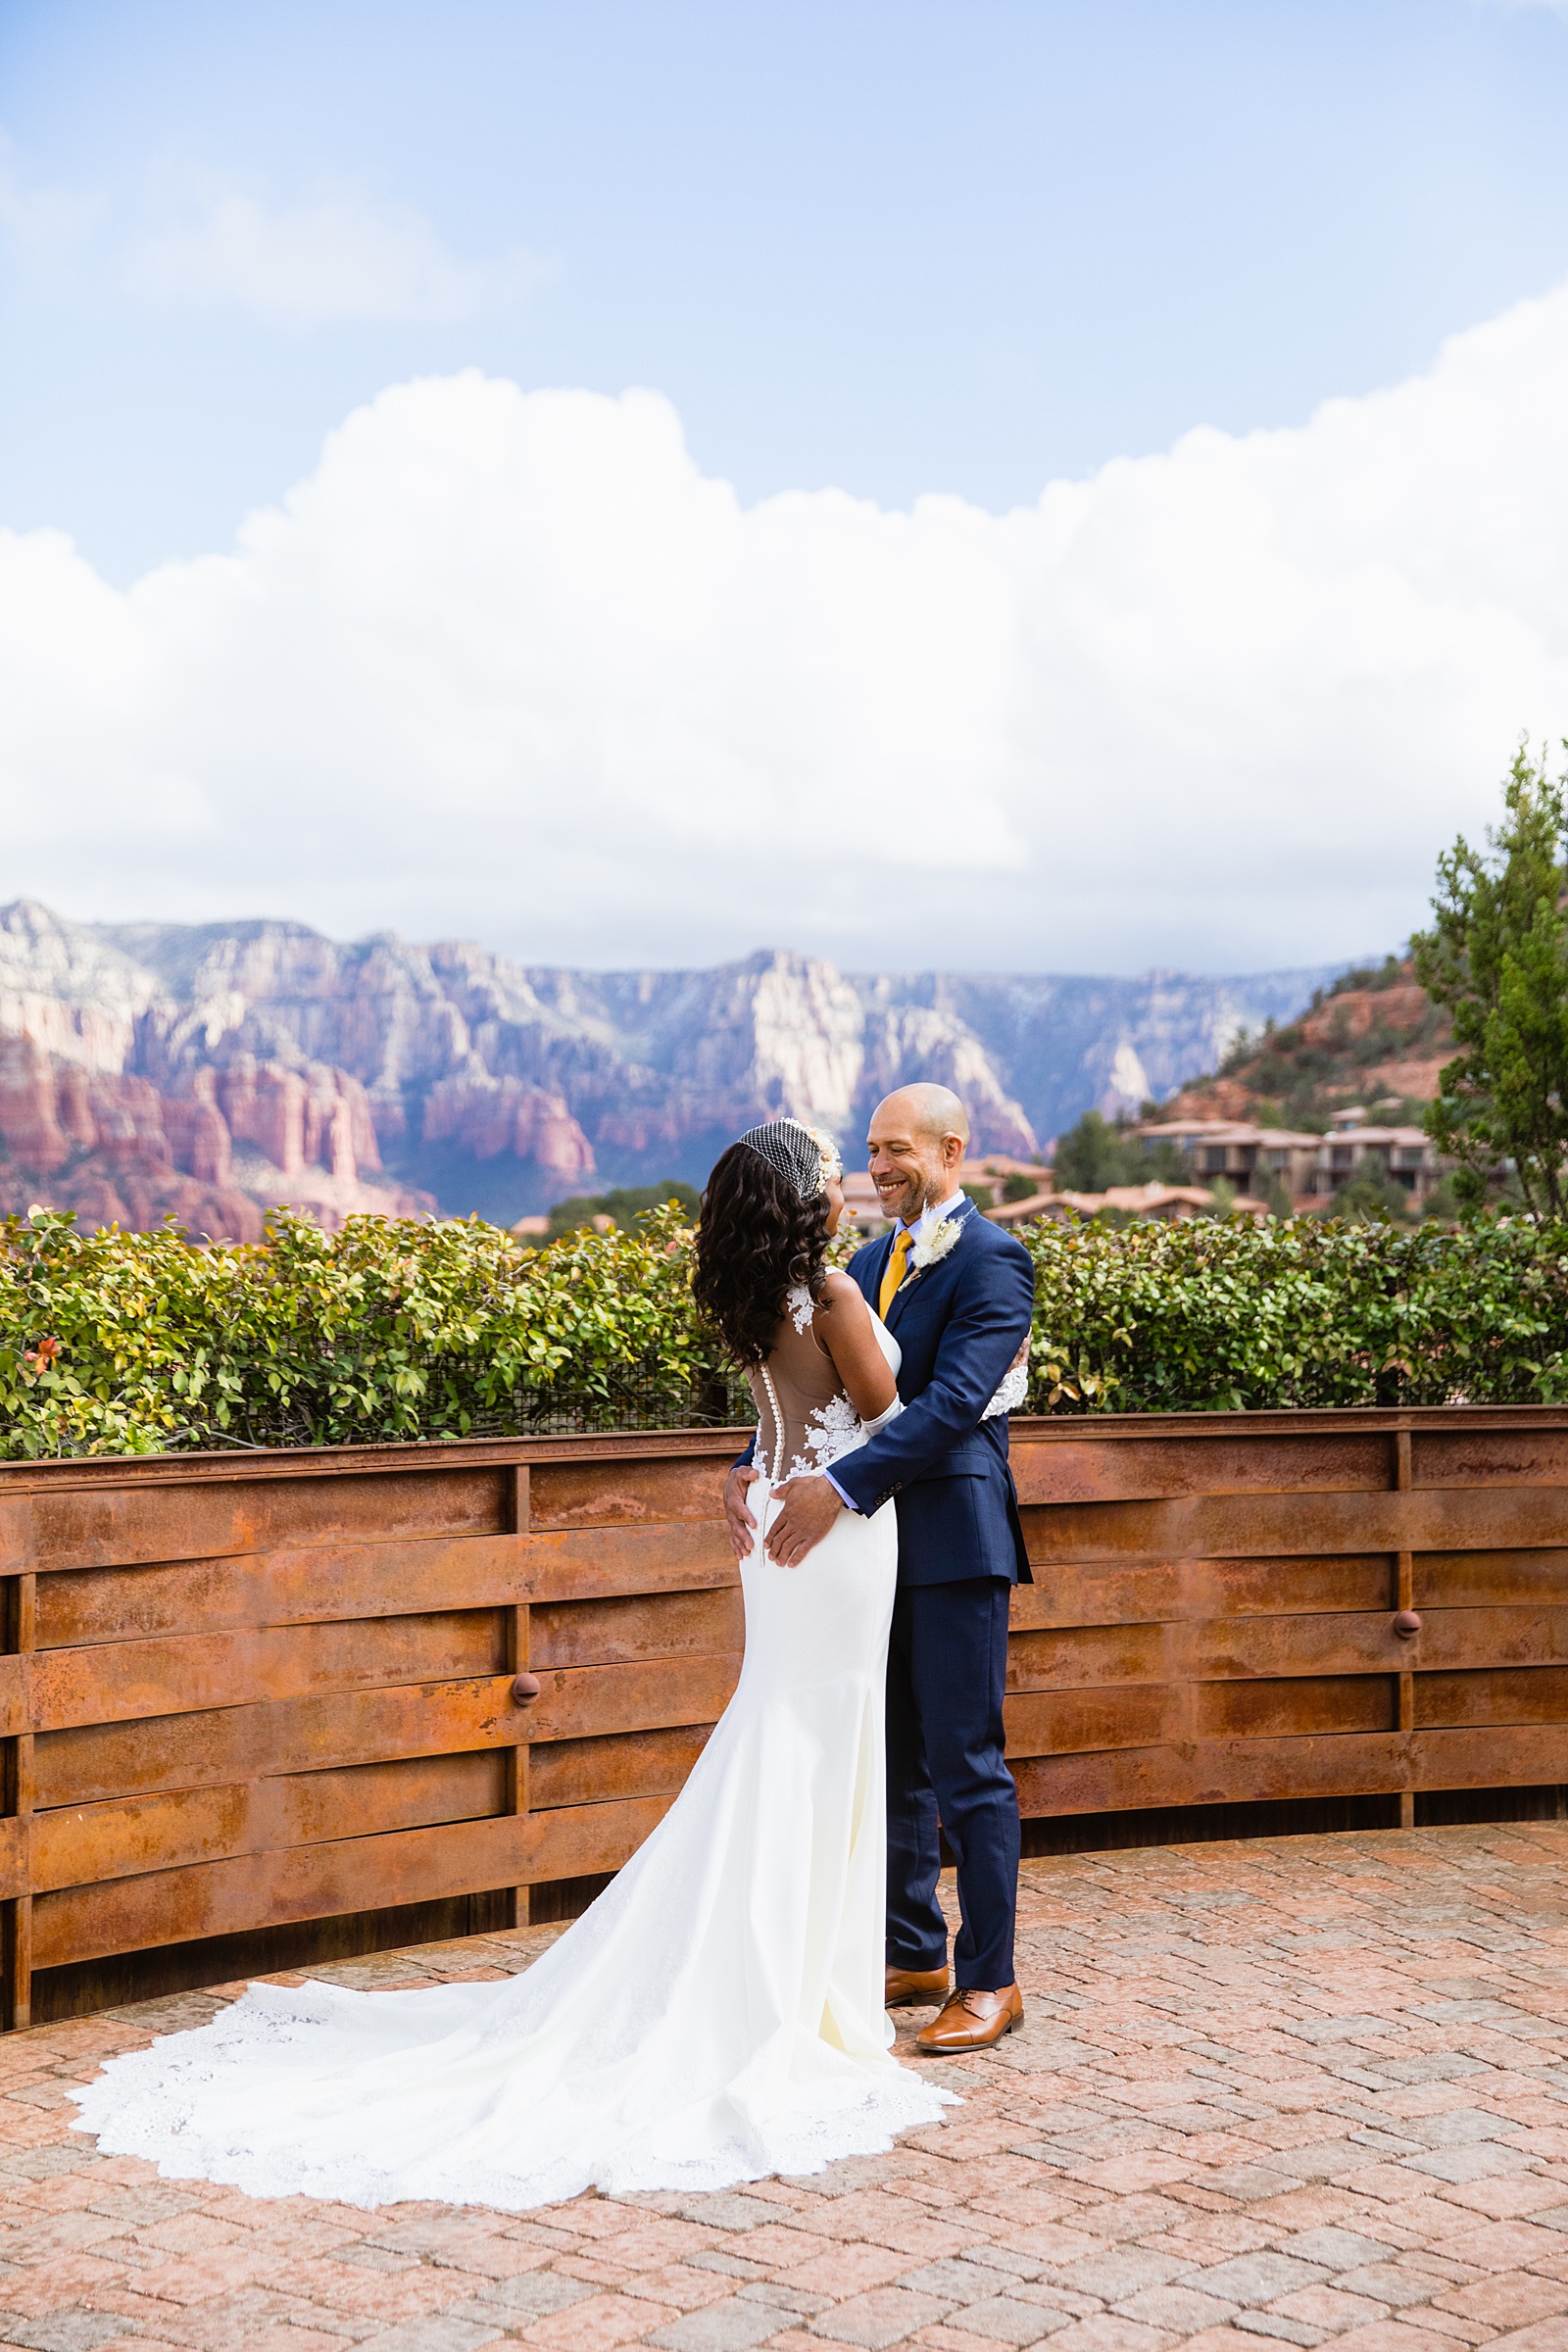 Newlyweds share an intimate moment during their Agave of Sedona wedding by Sedona wedding photographer PMA Photography.